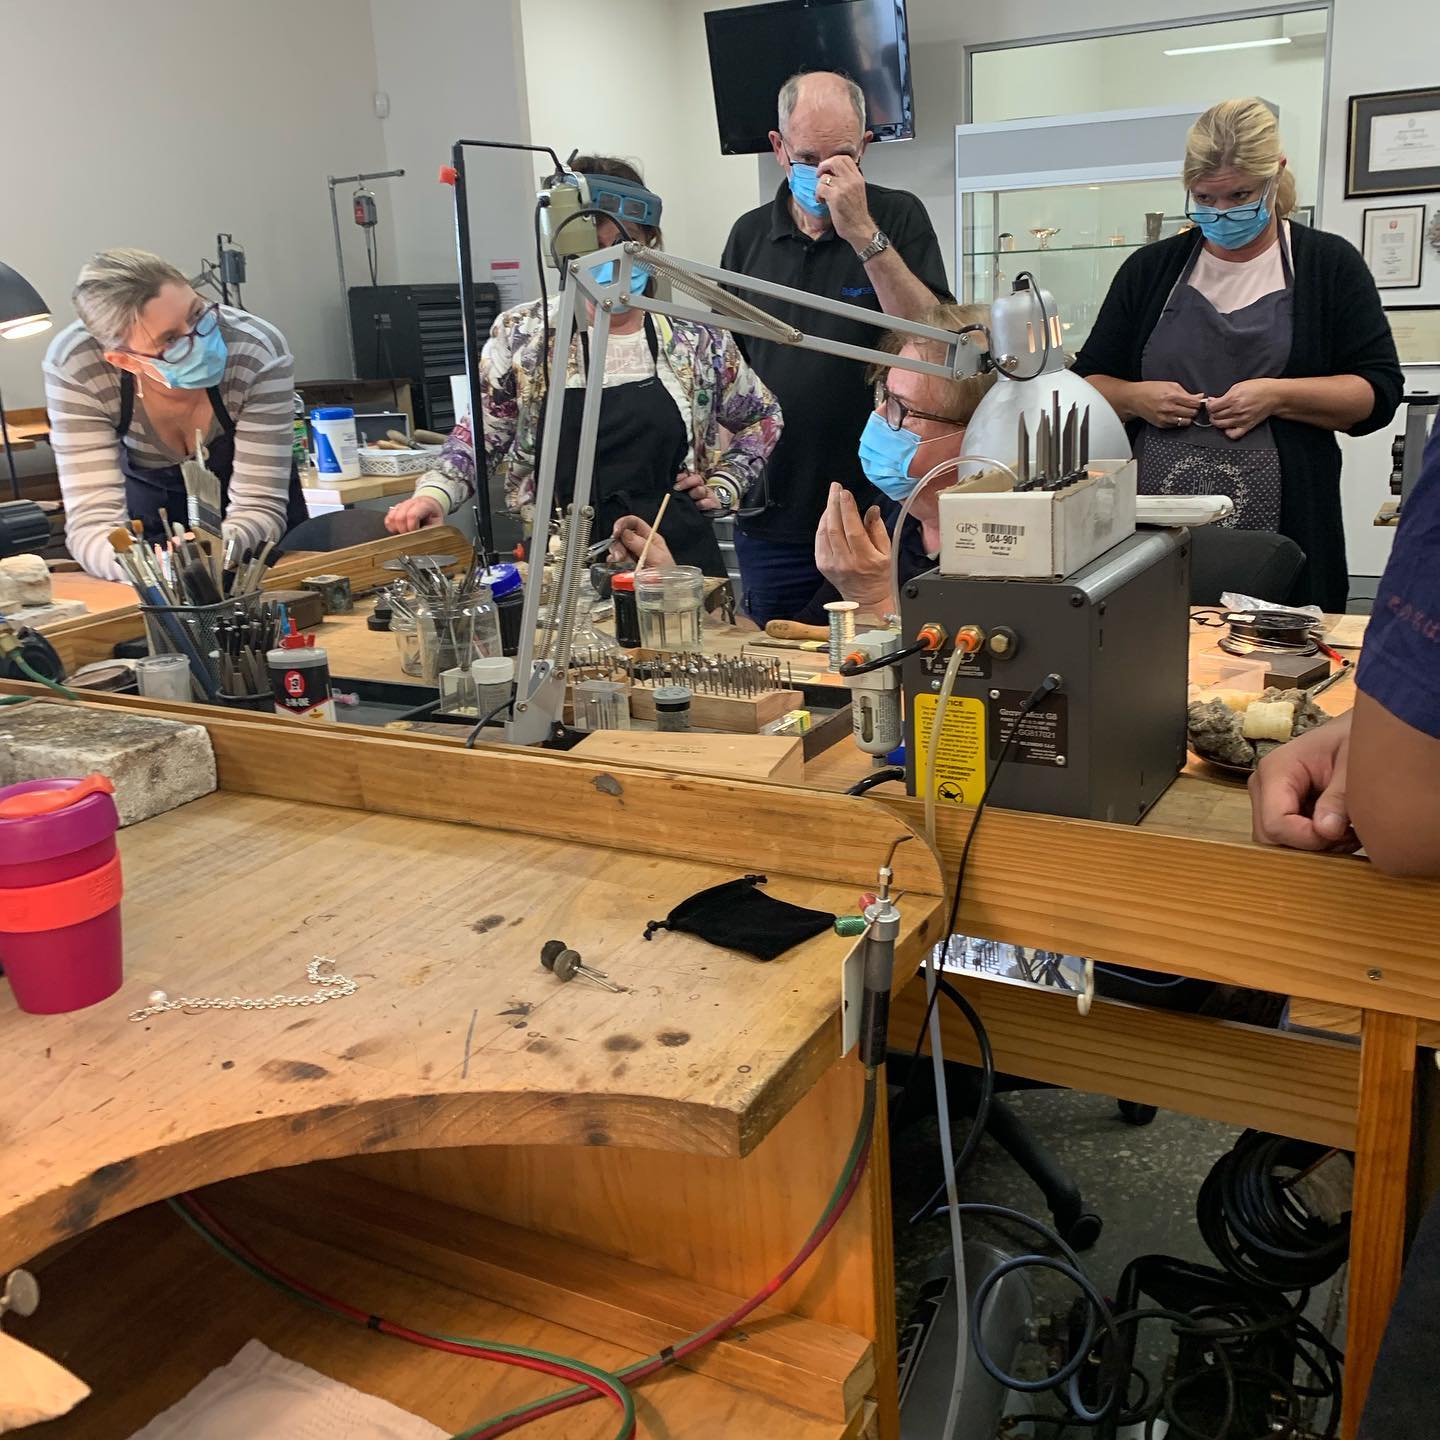 Philip Noakes explaining how to melt silver  at the Thursday morning , five week course.
#jewellerycontemporary #learnjewellerymaking #handmadejewellery #silverjewellery